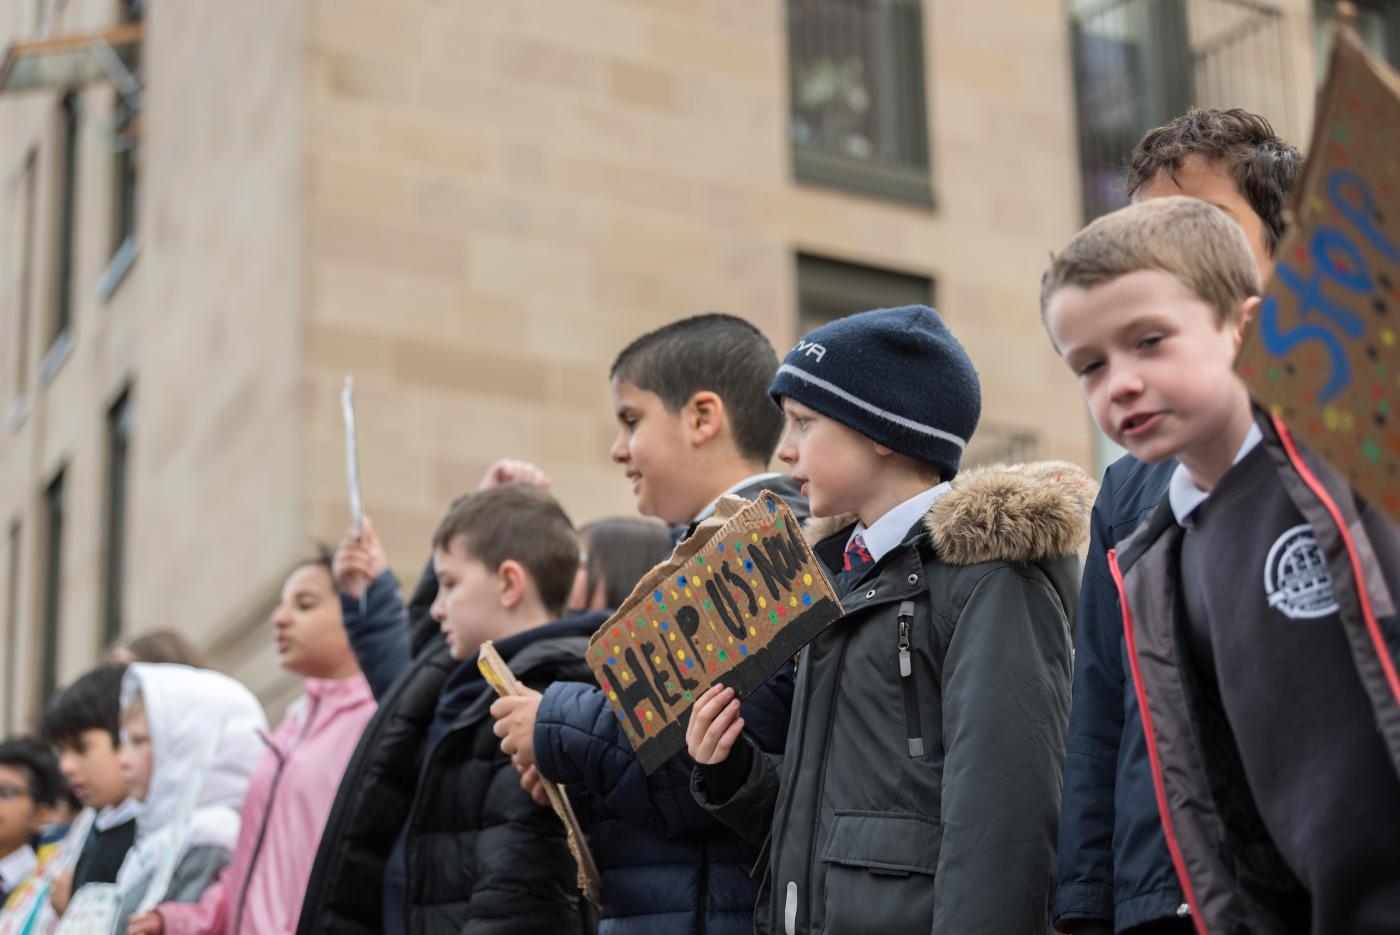 A group of young children speak out to stop climate change, as under a 'call to #UprootTheSystem', Fridays for Future, Glasgow, Scotland, United Kingdom, 2021, Photo: Albin Hillert/Life on Earth Pictures